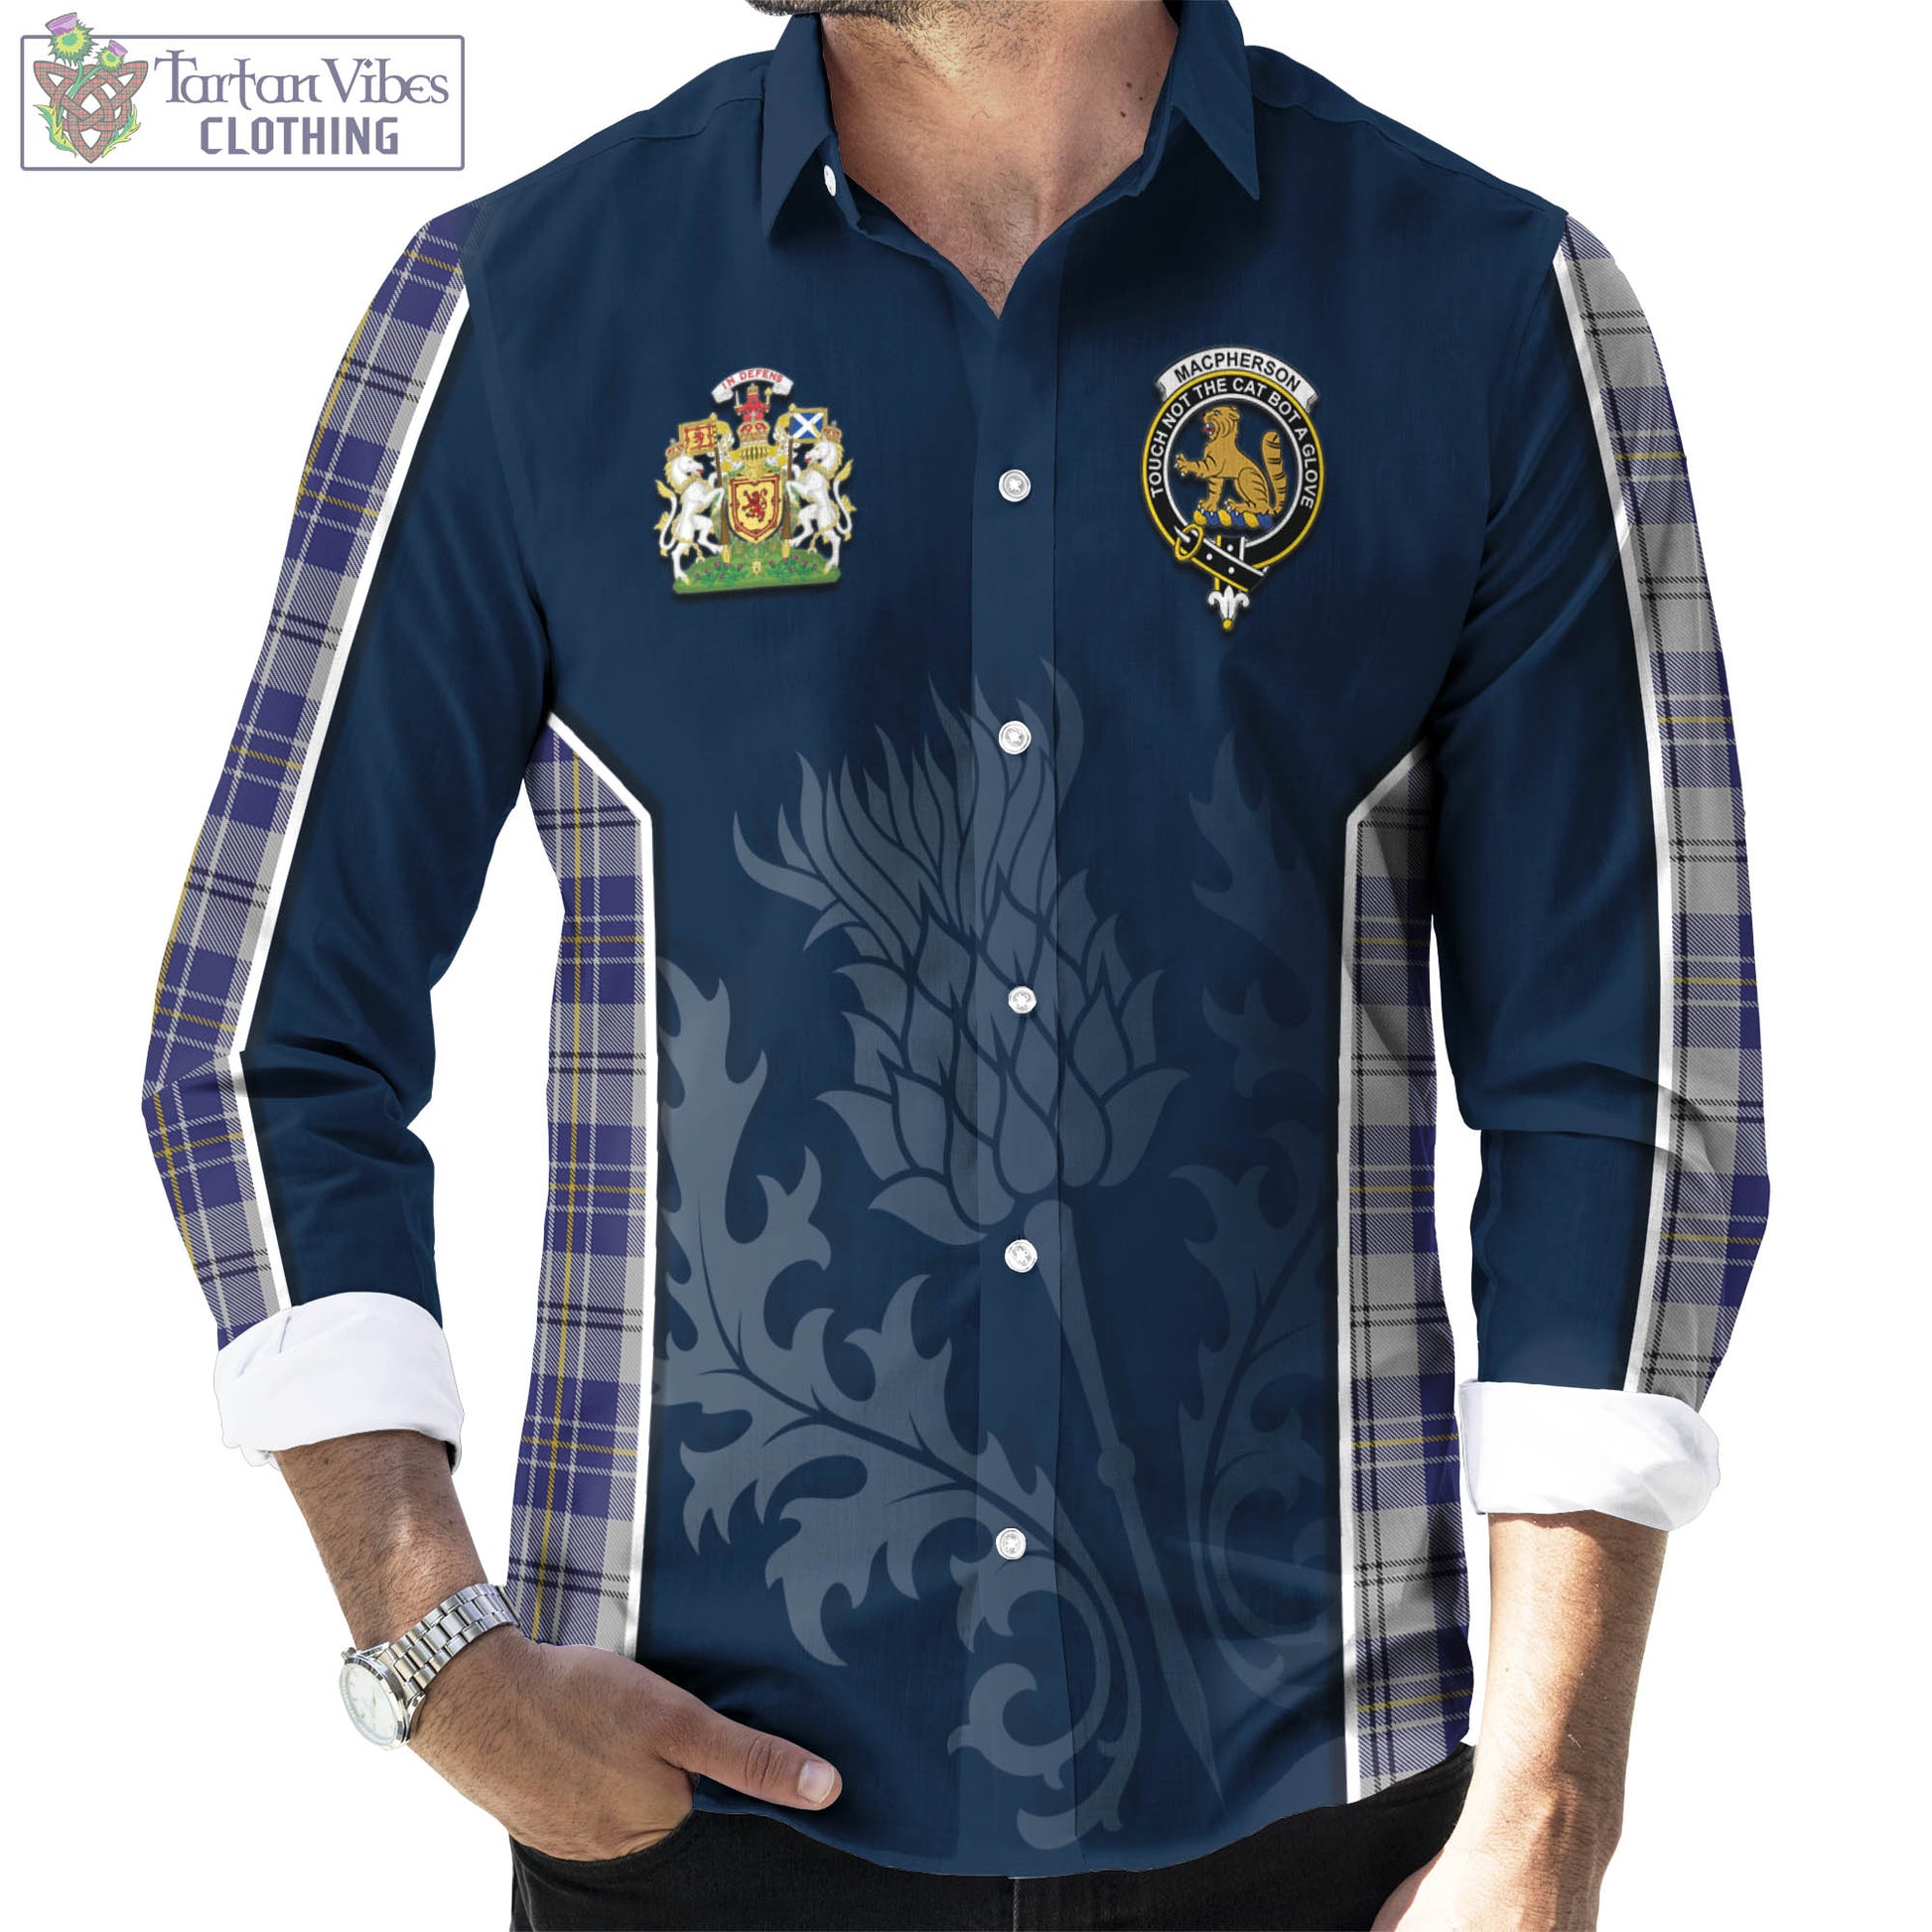 Tartan Vibes Clothing MacPherson Dress Blue Tartan Long Sleeve Button Up Shirt with Family Crest and Scottish Thistle Vibes Sport Style